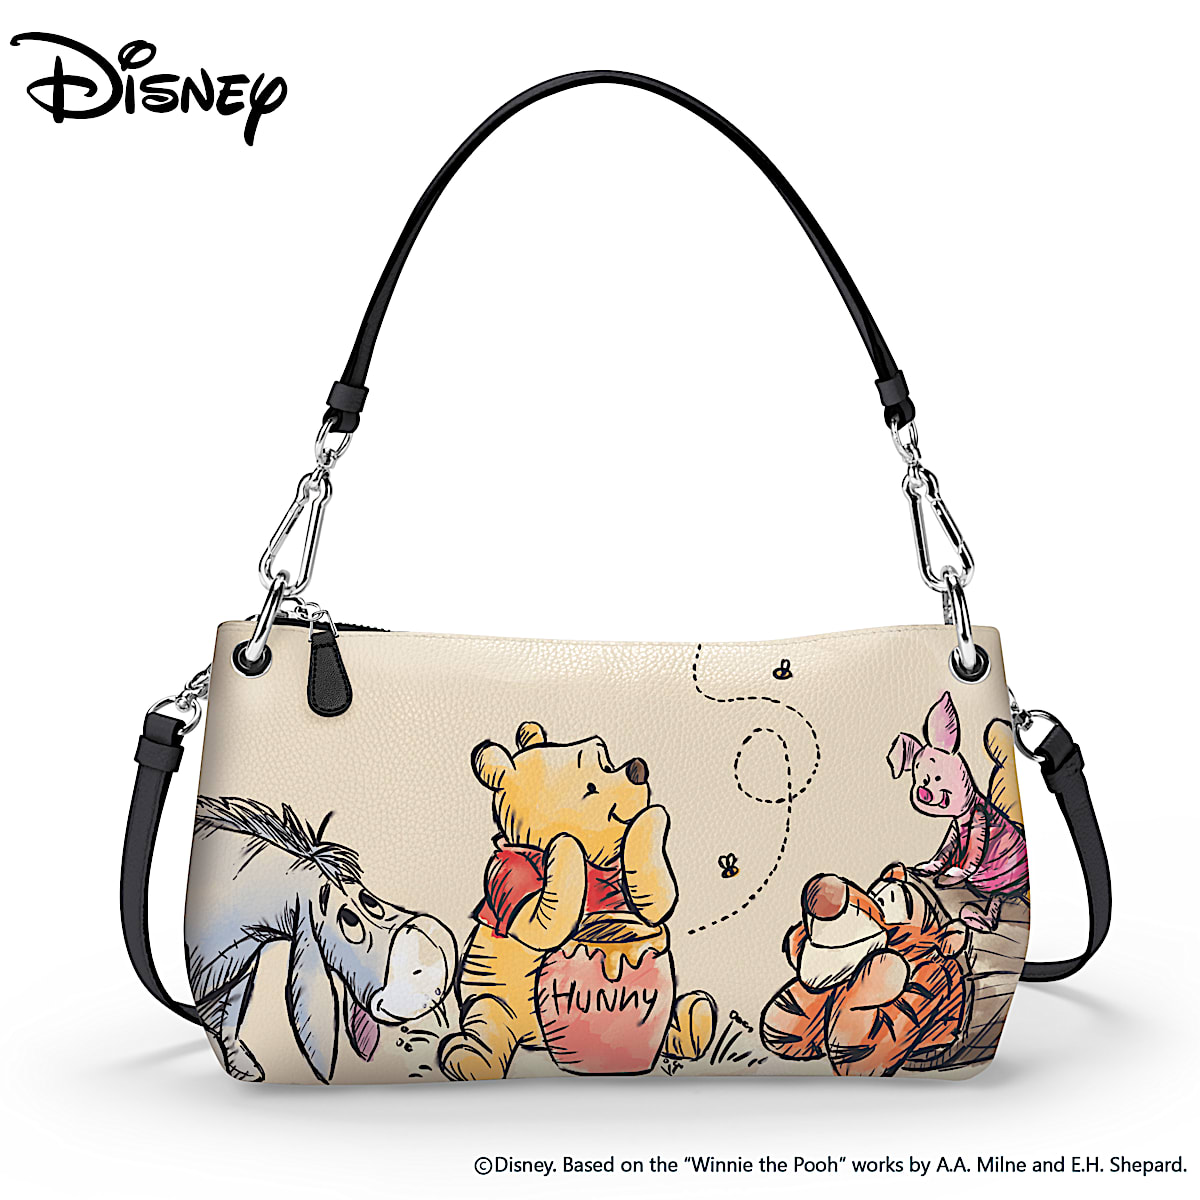 Disco mar Mediterráneo cosa Disney Winnie The Pooh Womens Convertible Handbag That Can Be Worn 3 Ways &  Features Artwork Based On The Work By E.H. Shepard